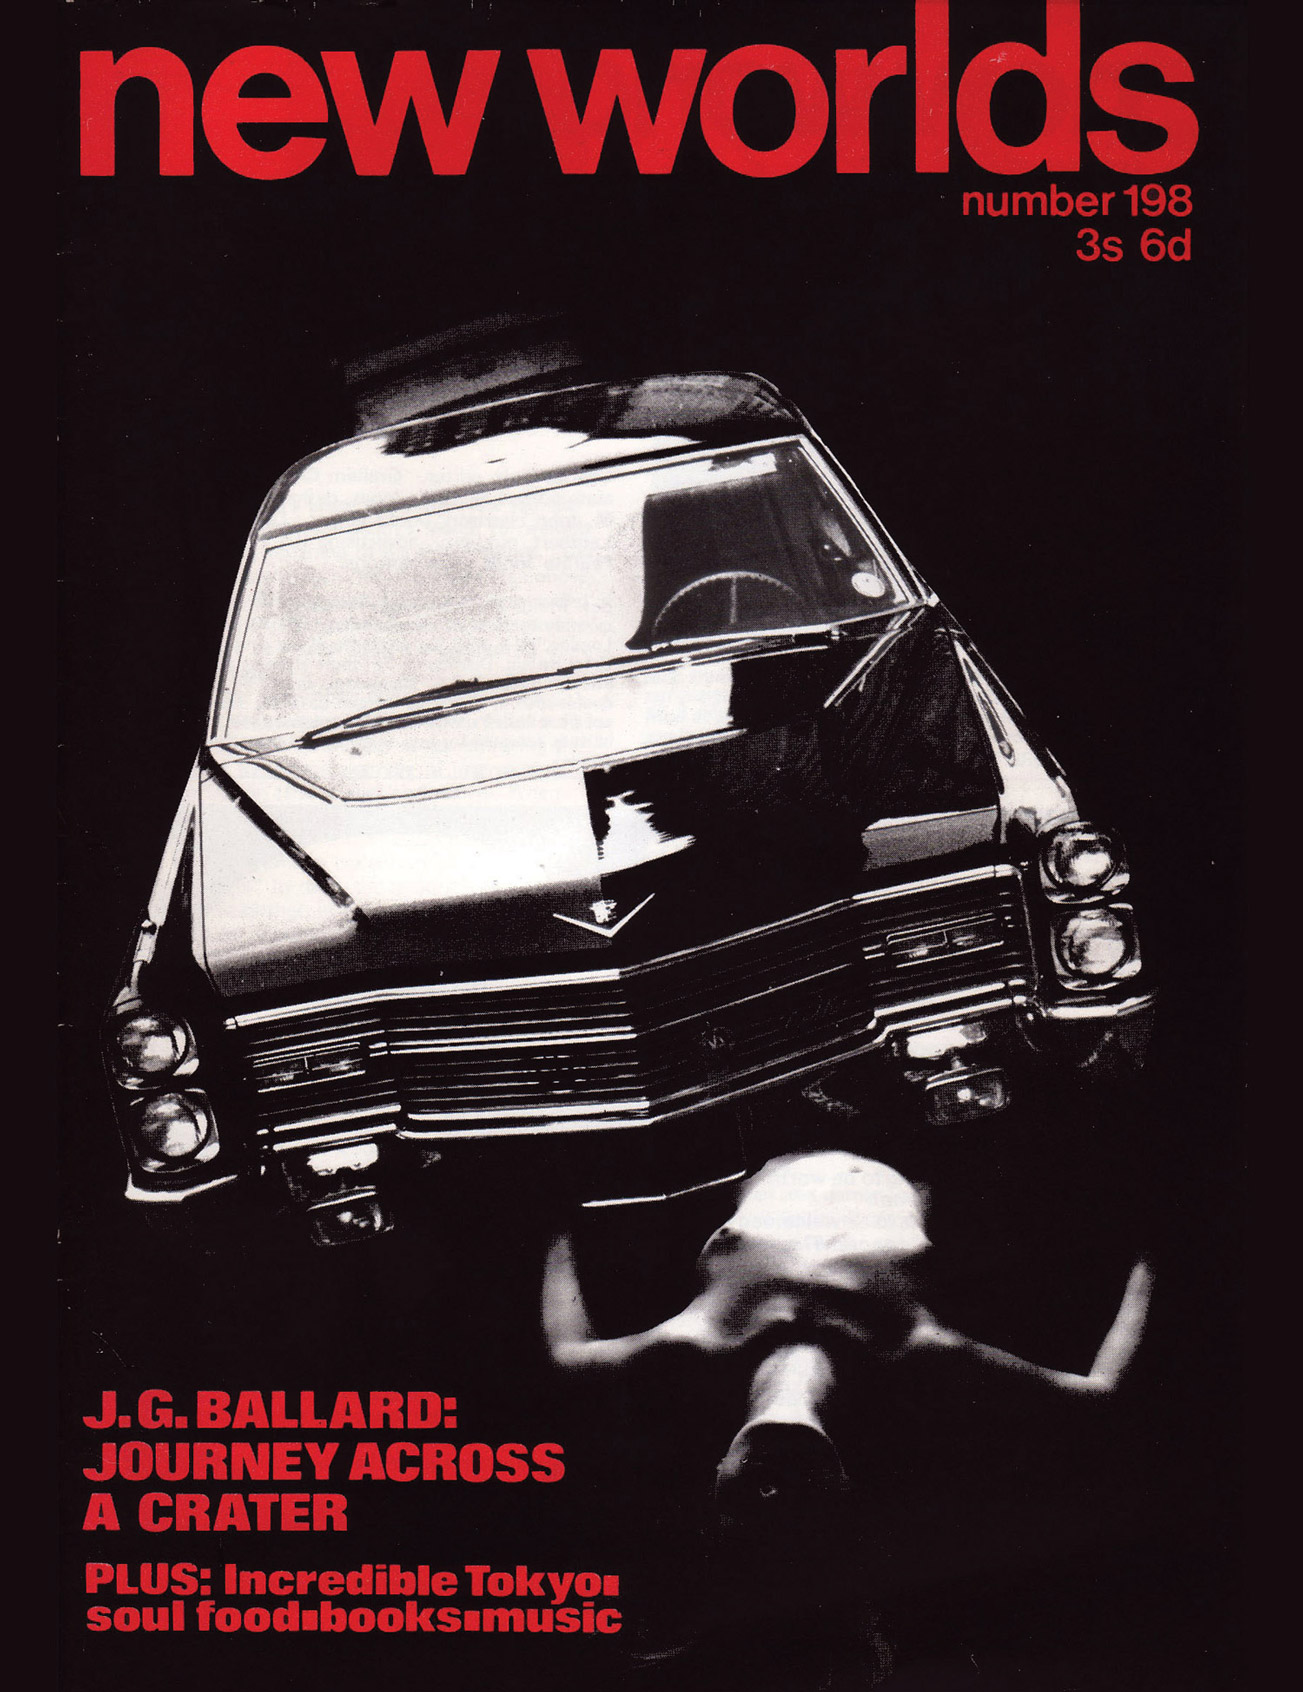 The cover of the February nineteen seventy issue of New Worlds, depicting a car suspended in midair and the title of J.G. Ballard’s story “Journey Across the Crater.”